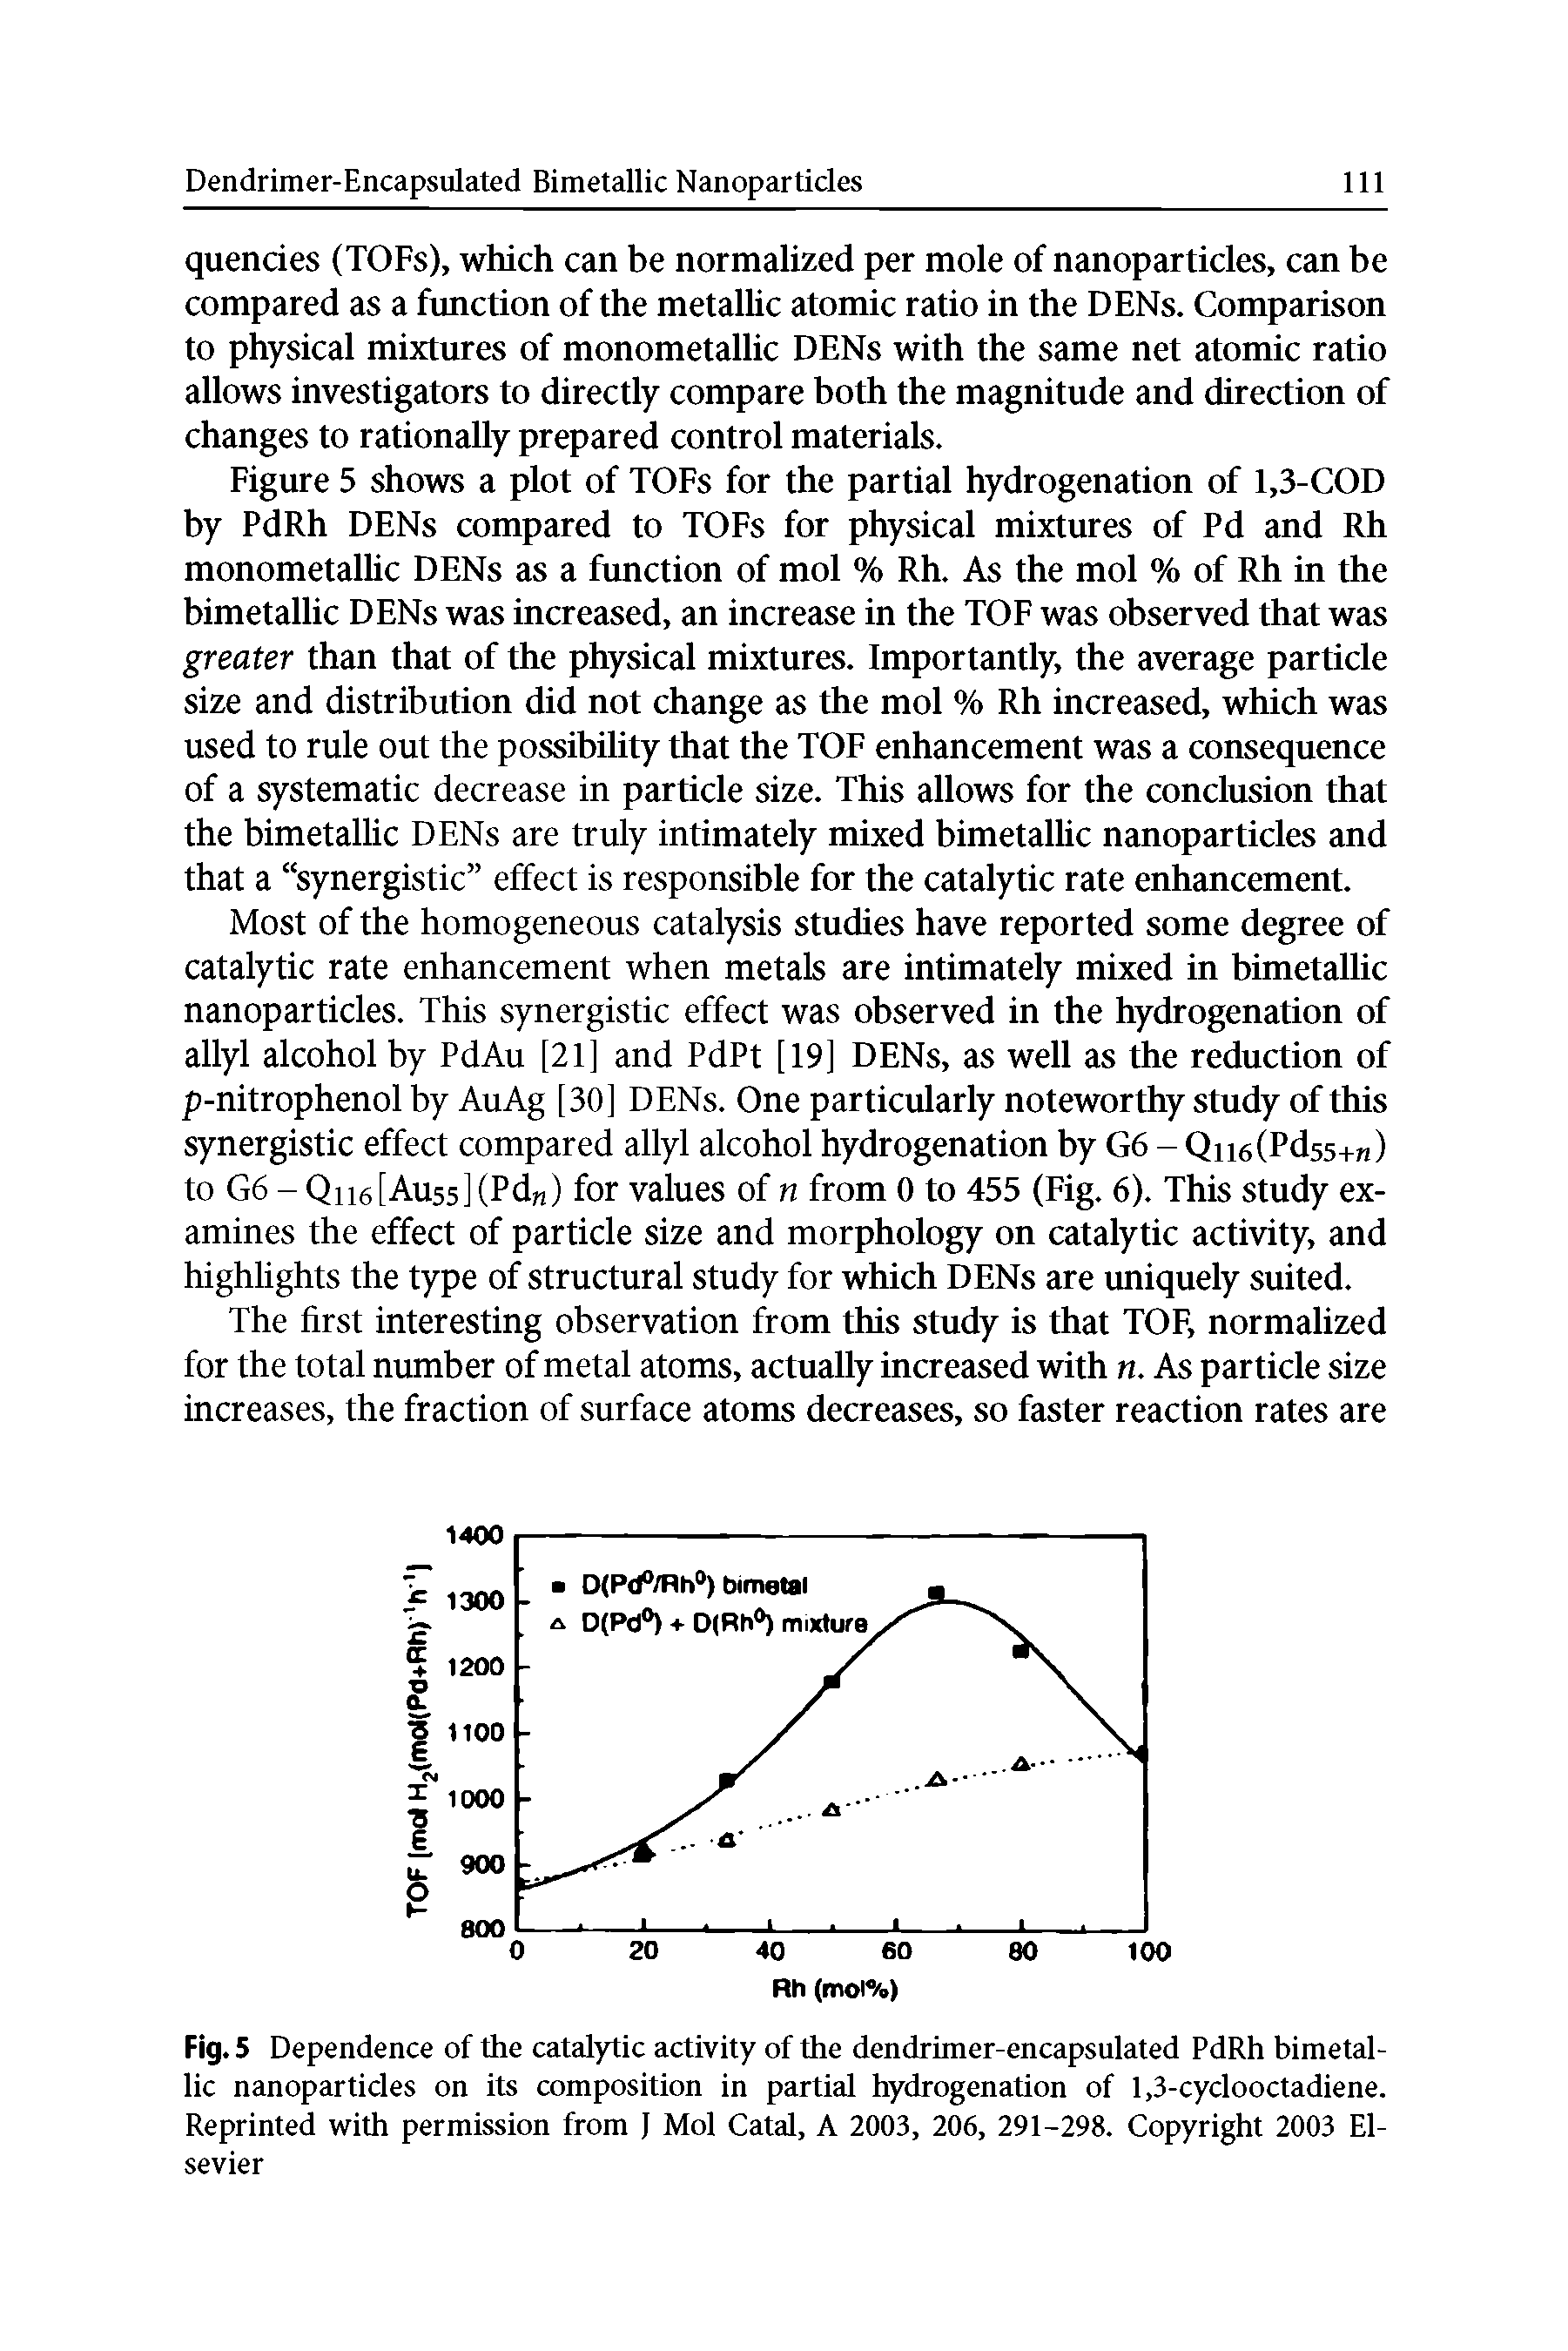 Fig. 5 Dependence of the catalytic activity of the dendrimer-encapsulated PdRh bimetallic nanoparticles on its composition in partial hydrogenation of 1,3-cyclooctadiene. Reprinted with permission from J Mol Catal, A 2003, 206, 291-298. Copyright 2003 Elsevier...